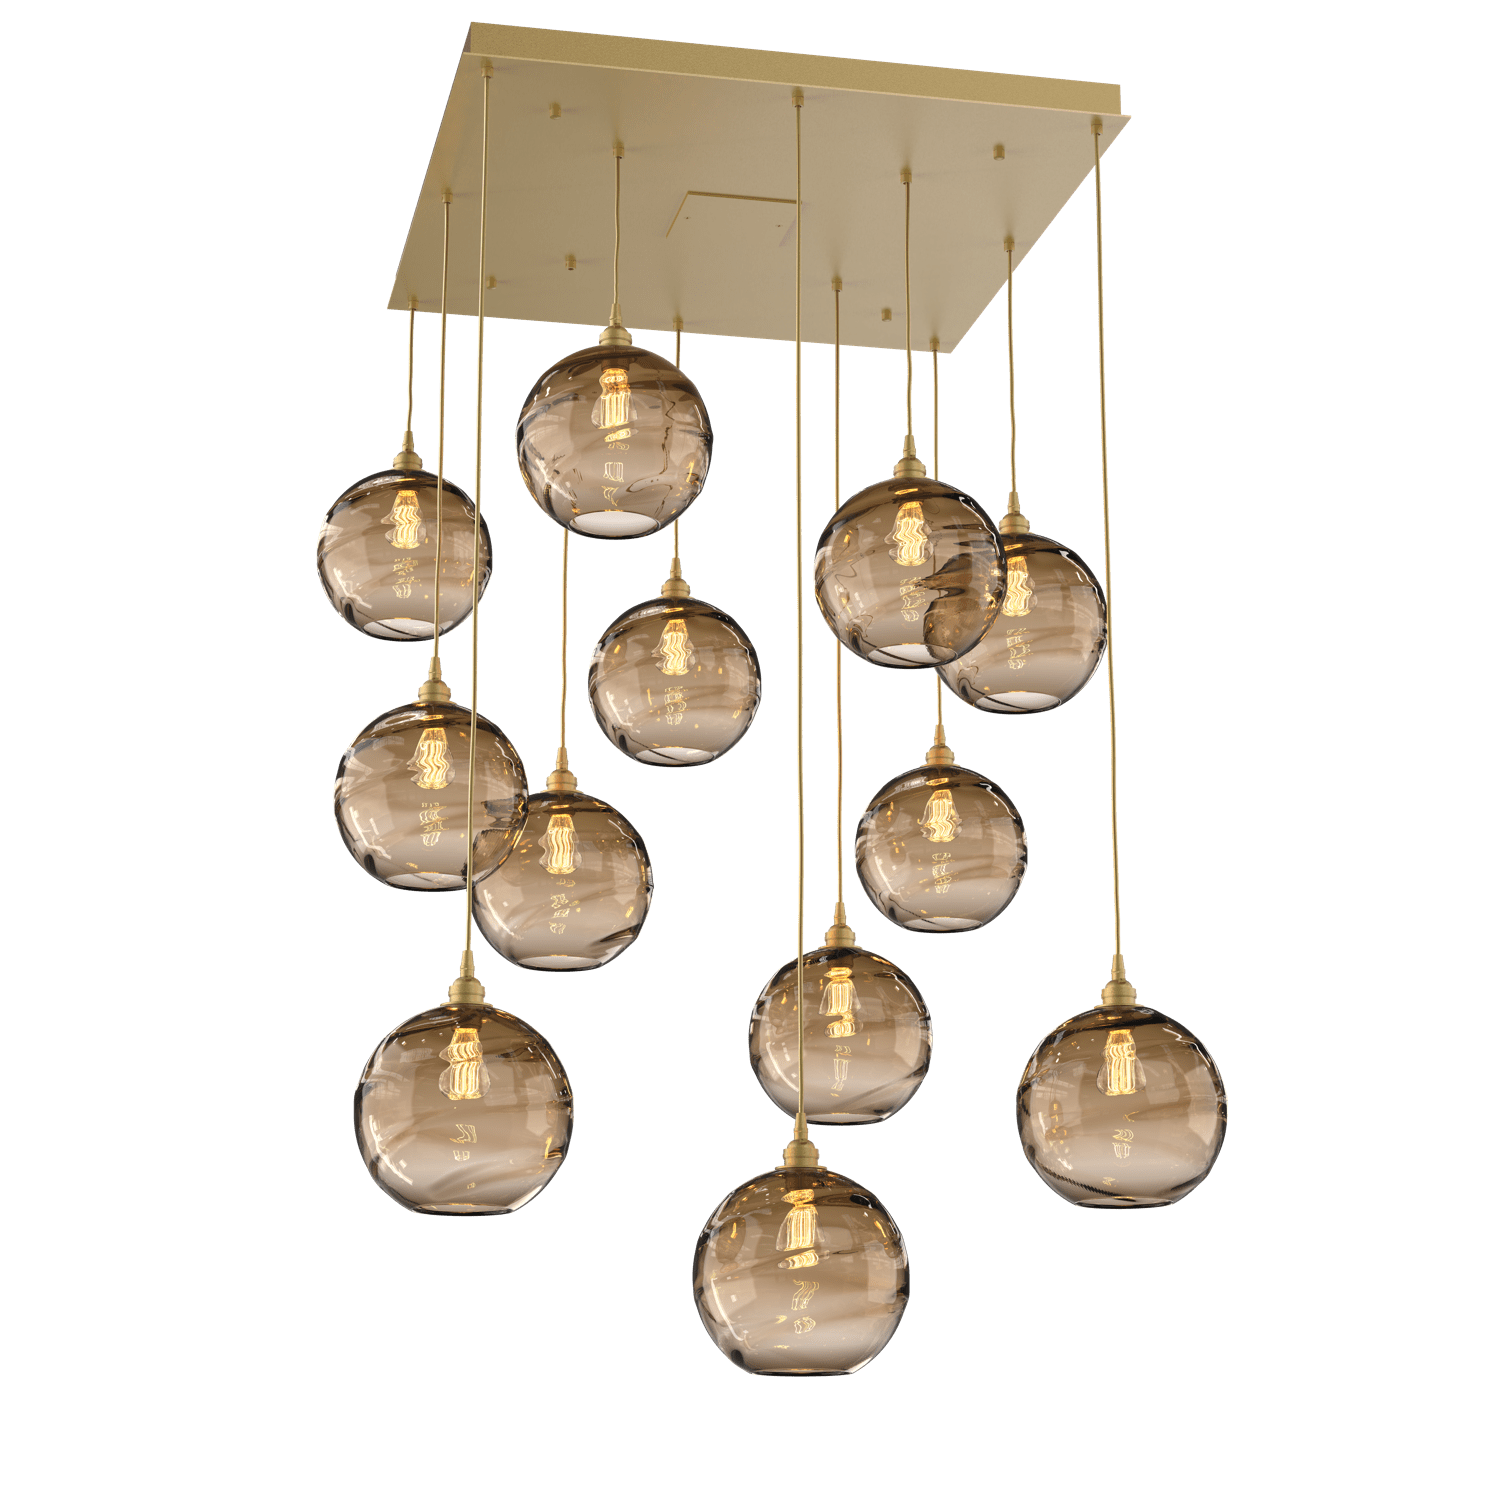 CHB0047-12-GB-OB-Hammerton-Studio-Optic-Blown-Glass-Terra-12-light-square-pendant-chandelier-with-gilded-brass-finish-and-optic-bronze-blown-glass-shades-and-incandescent-lamping